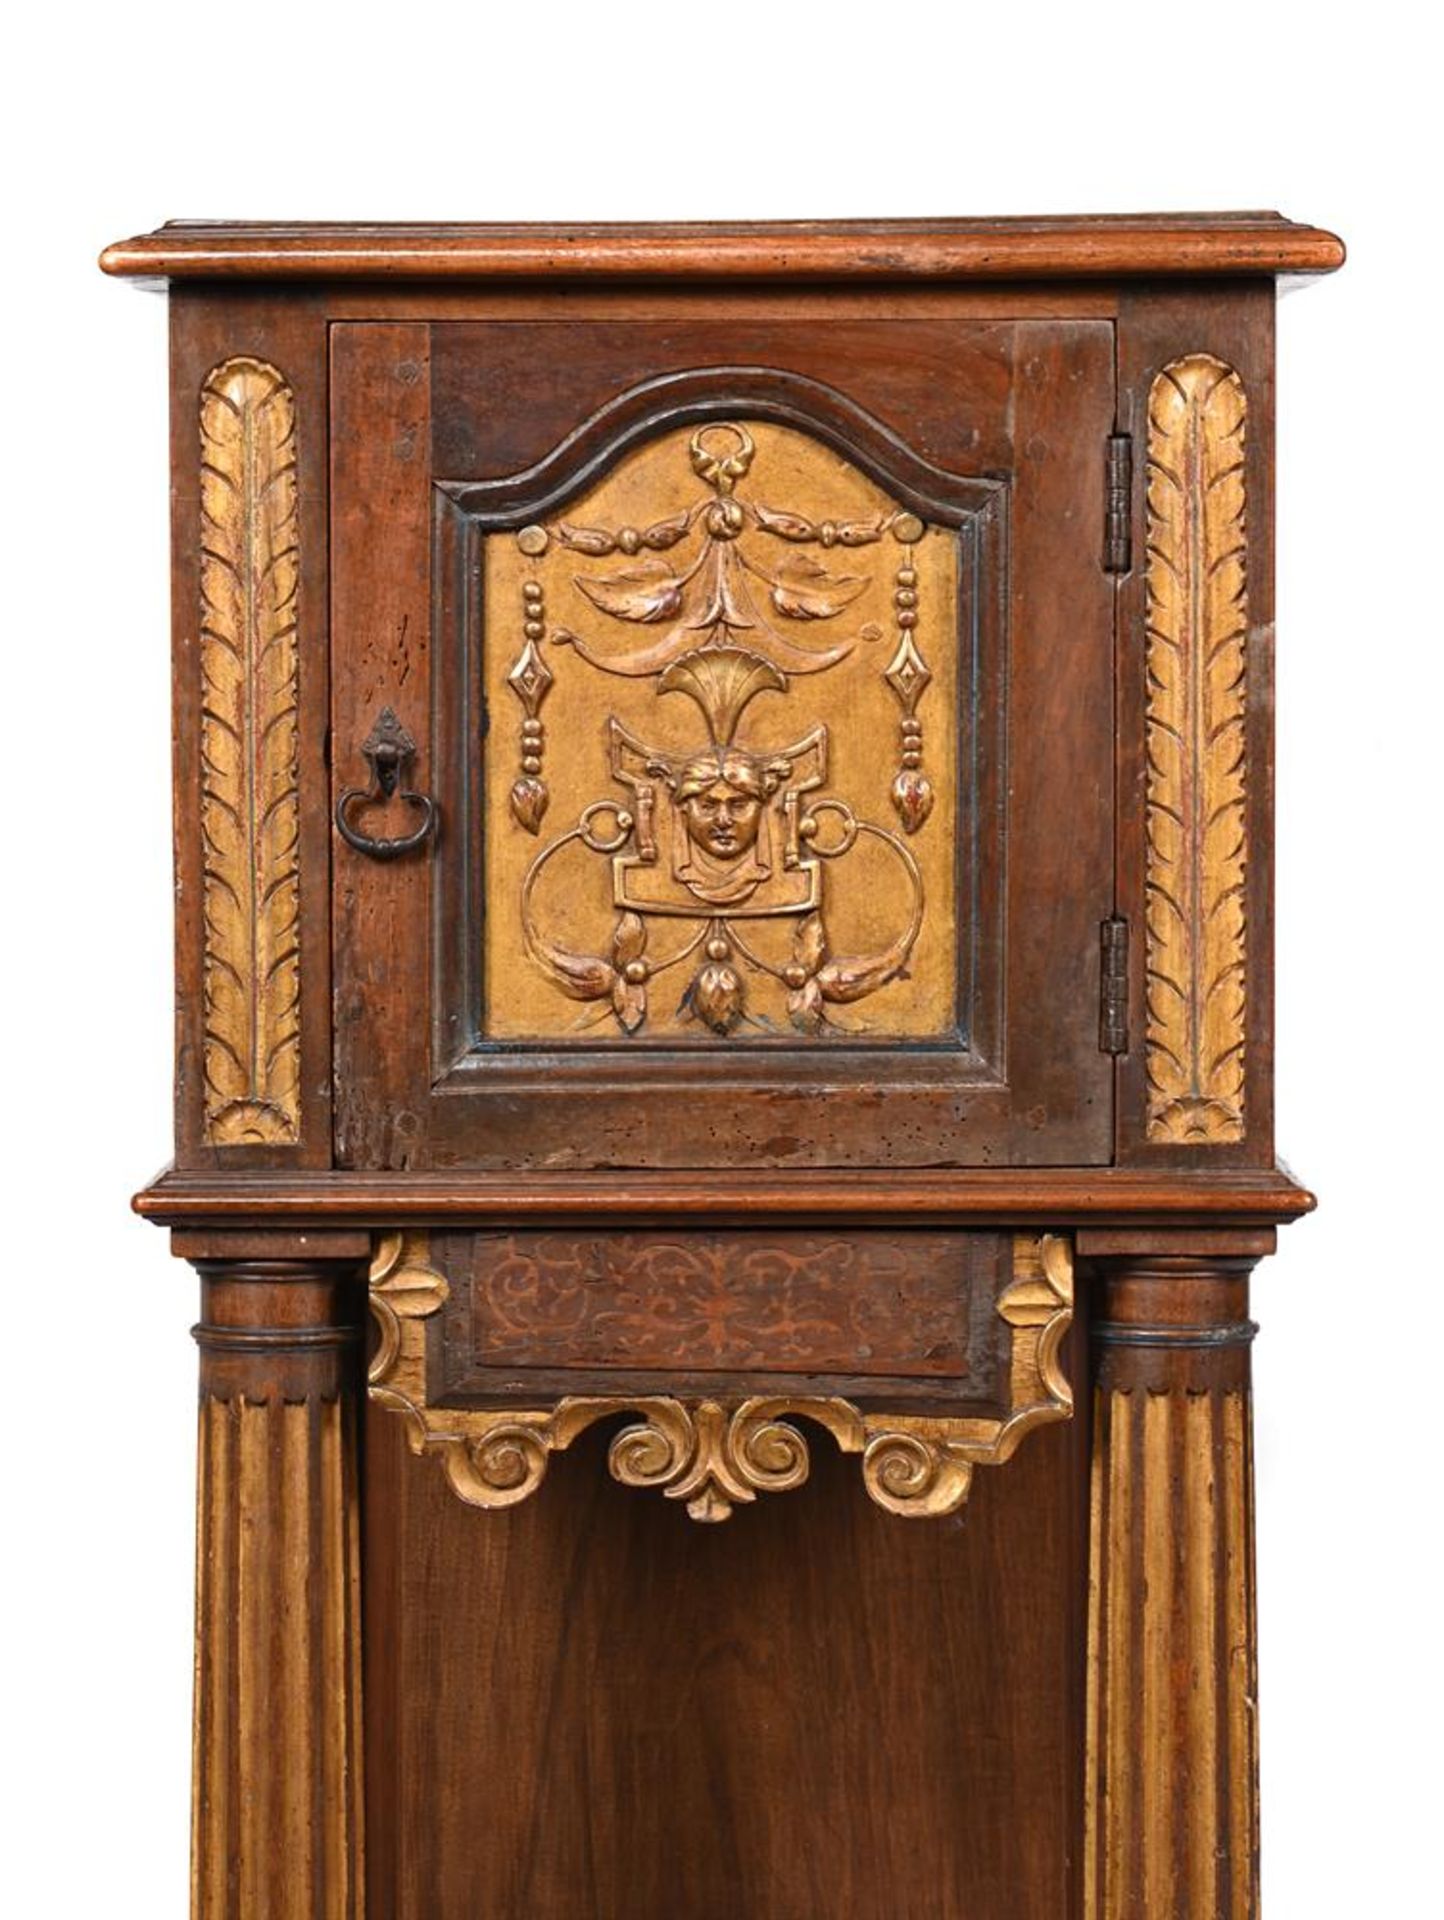 AN ITALIAN WALNUT AND PARCEL GILT PEDESTAL CUPBOARD, LATE 17TH OR EARLY 18TH CENTURY AND LATER - Image 3 of 3